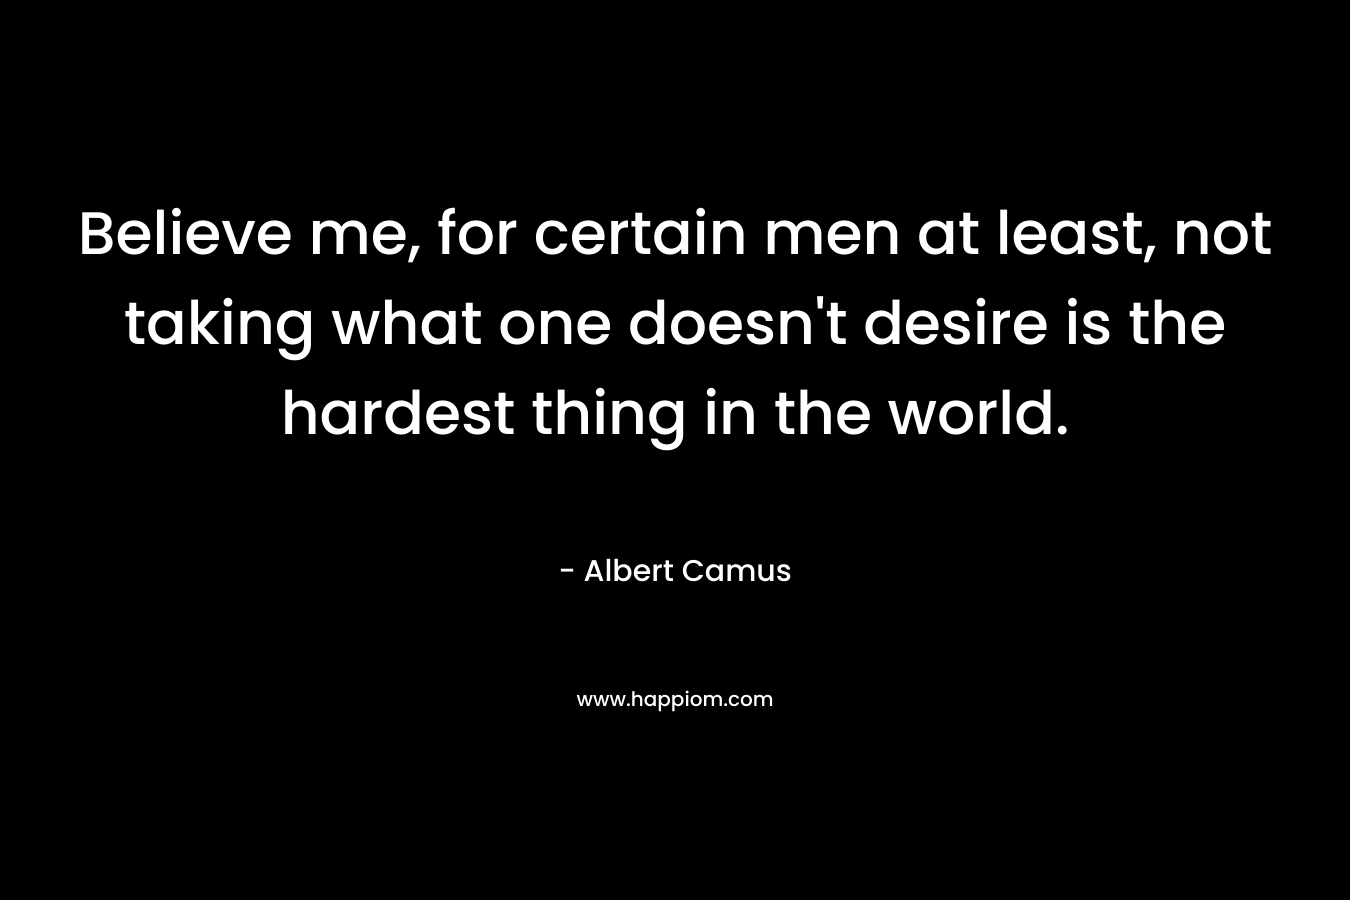 Believe me, for certain men at least, not taking what one doesn't desire is the hardest thing in the world.